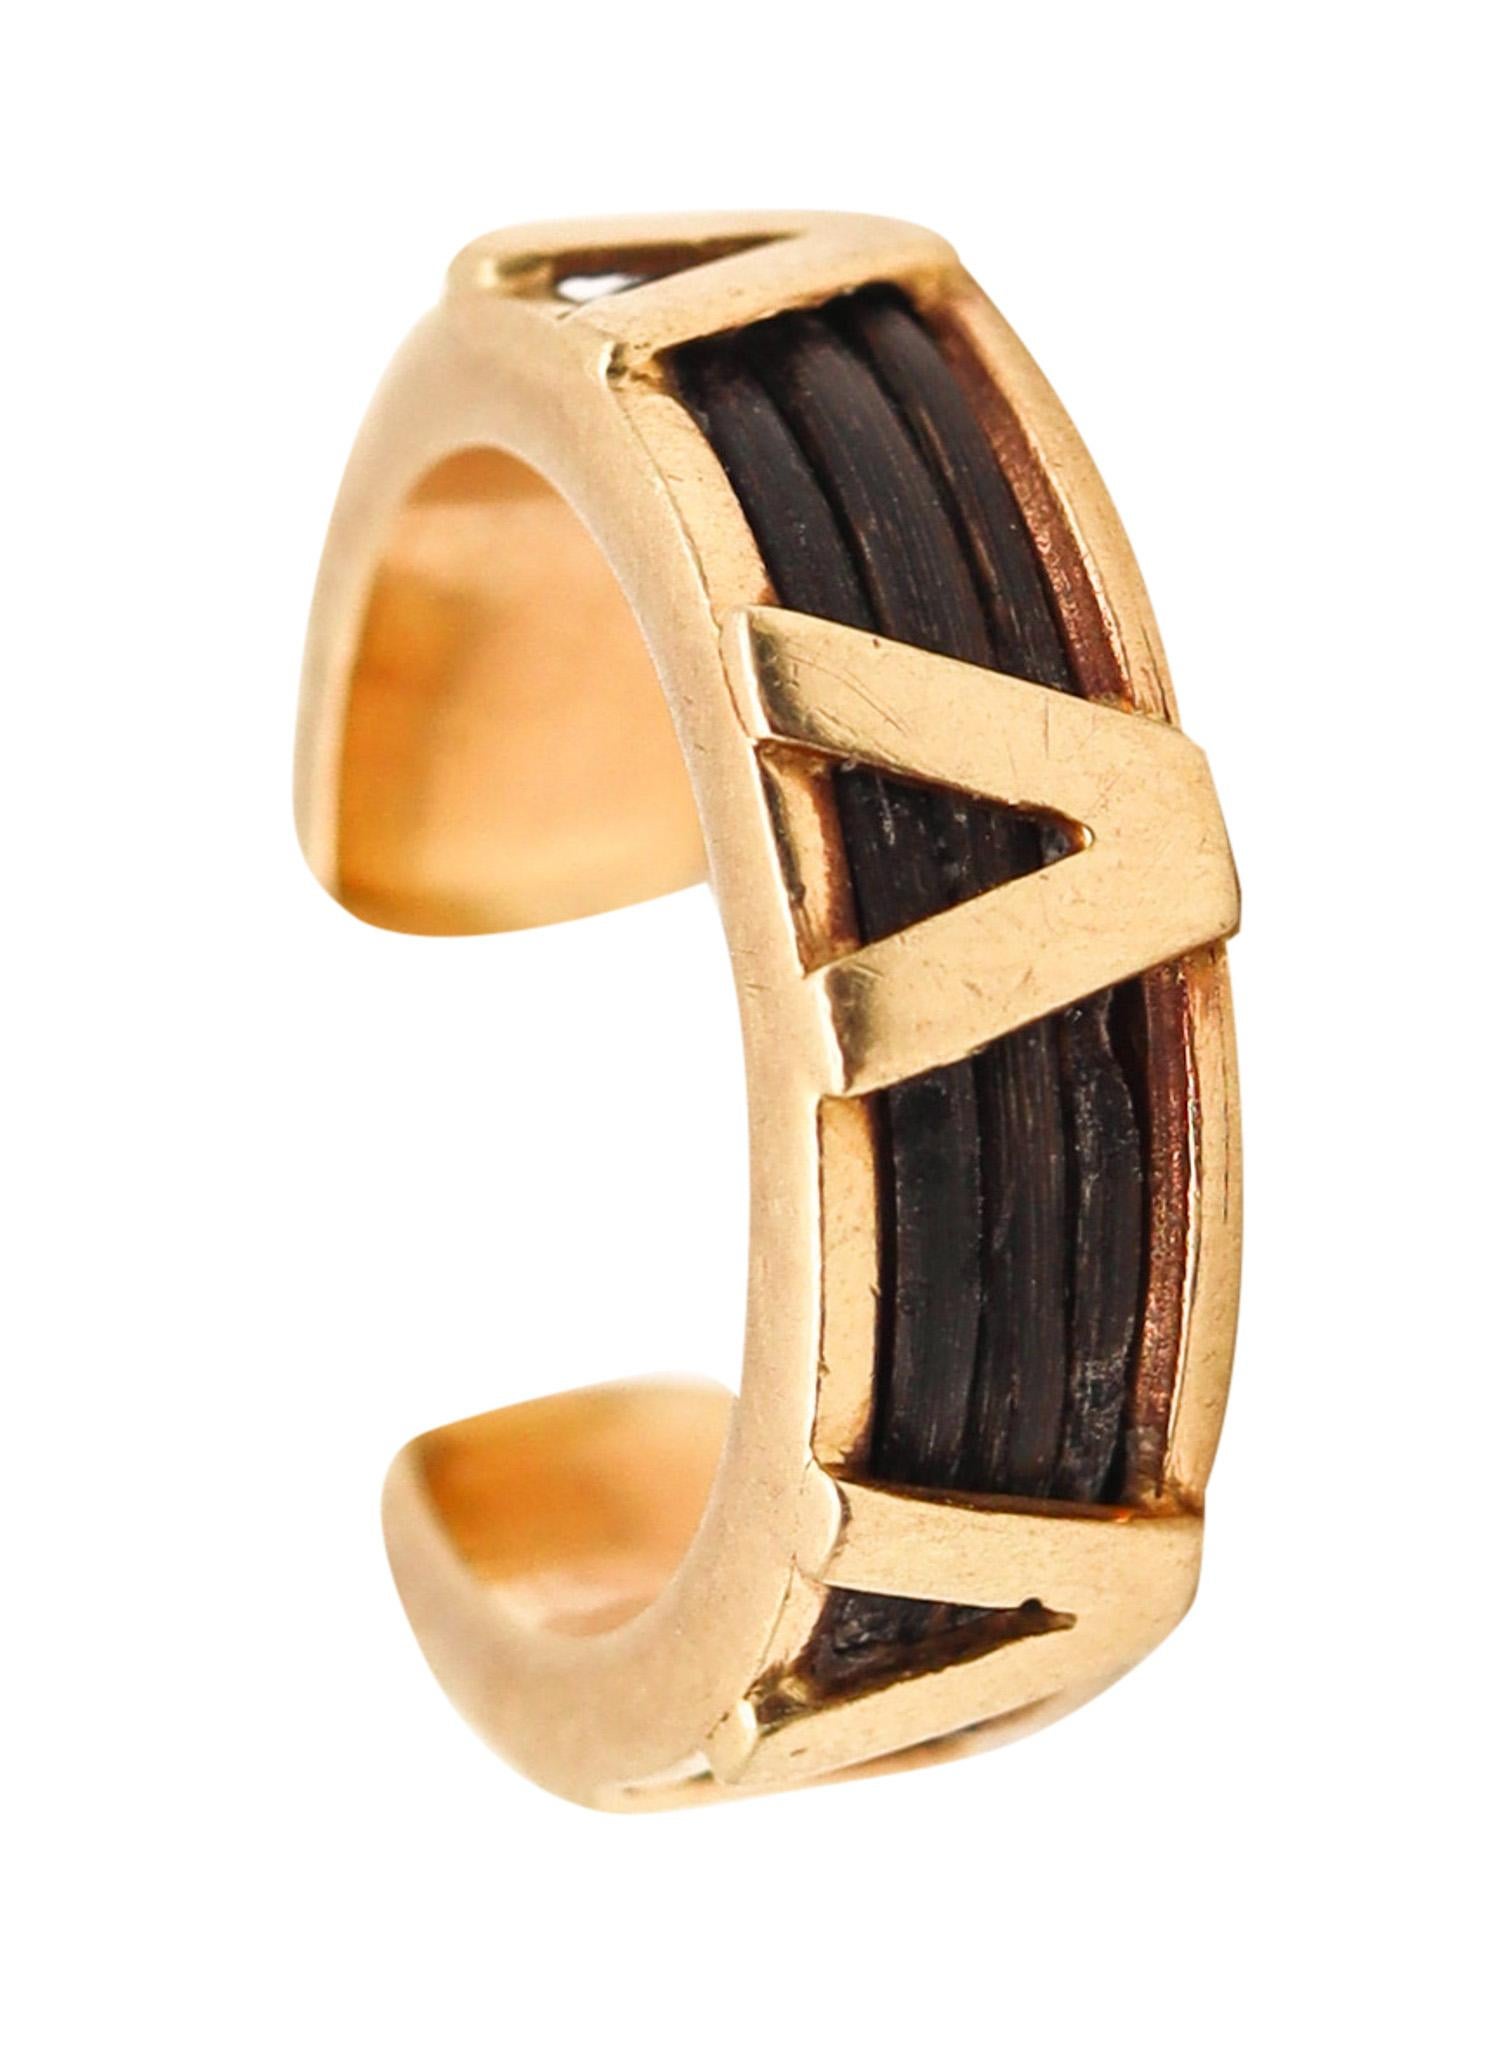 Buy 22K 916 Gold Elephant Hair Ring Row Online In India, 54% OFF